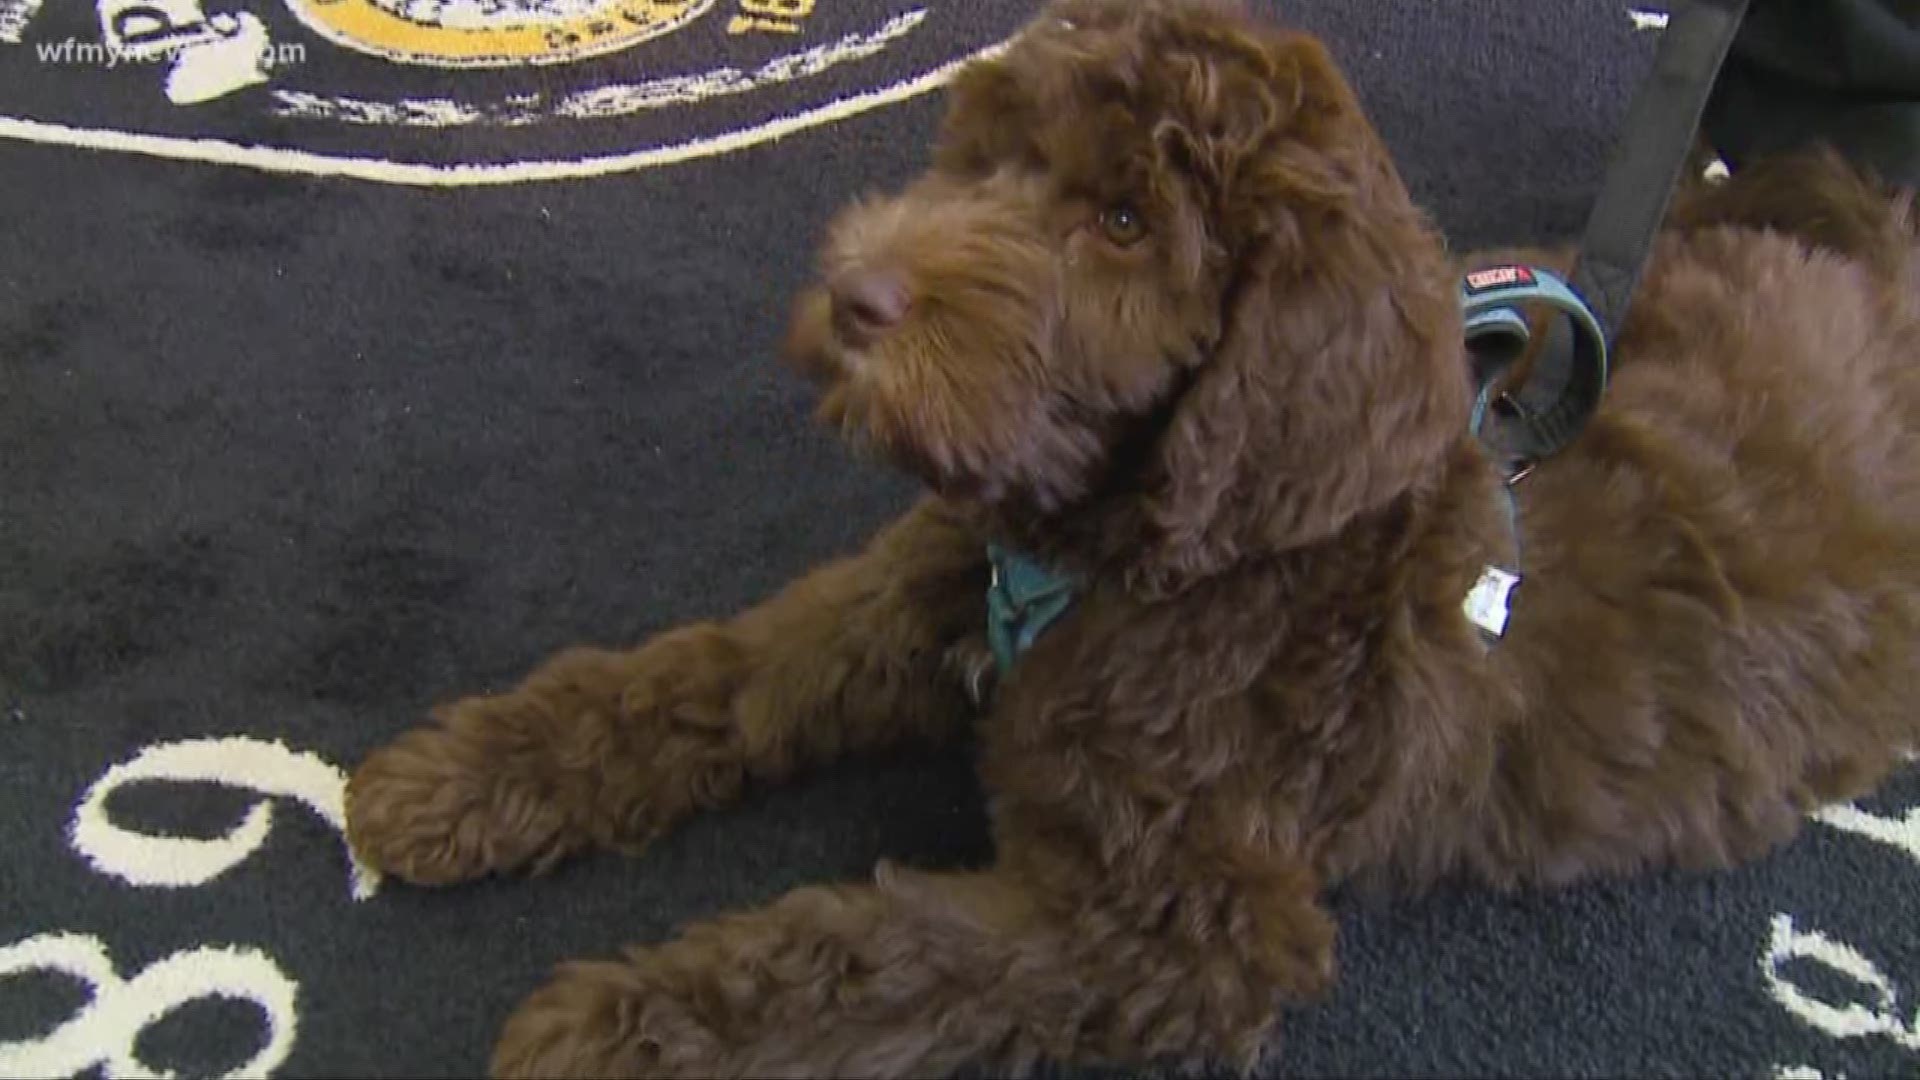 Greensboro Police introduces "Hero" their new therapy dog